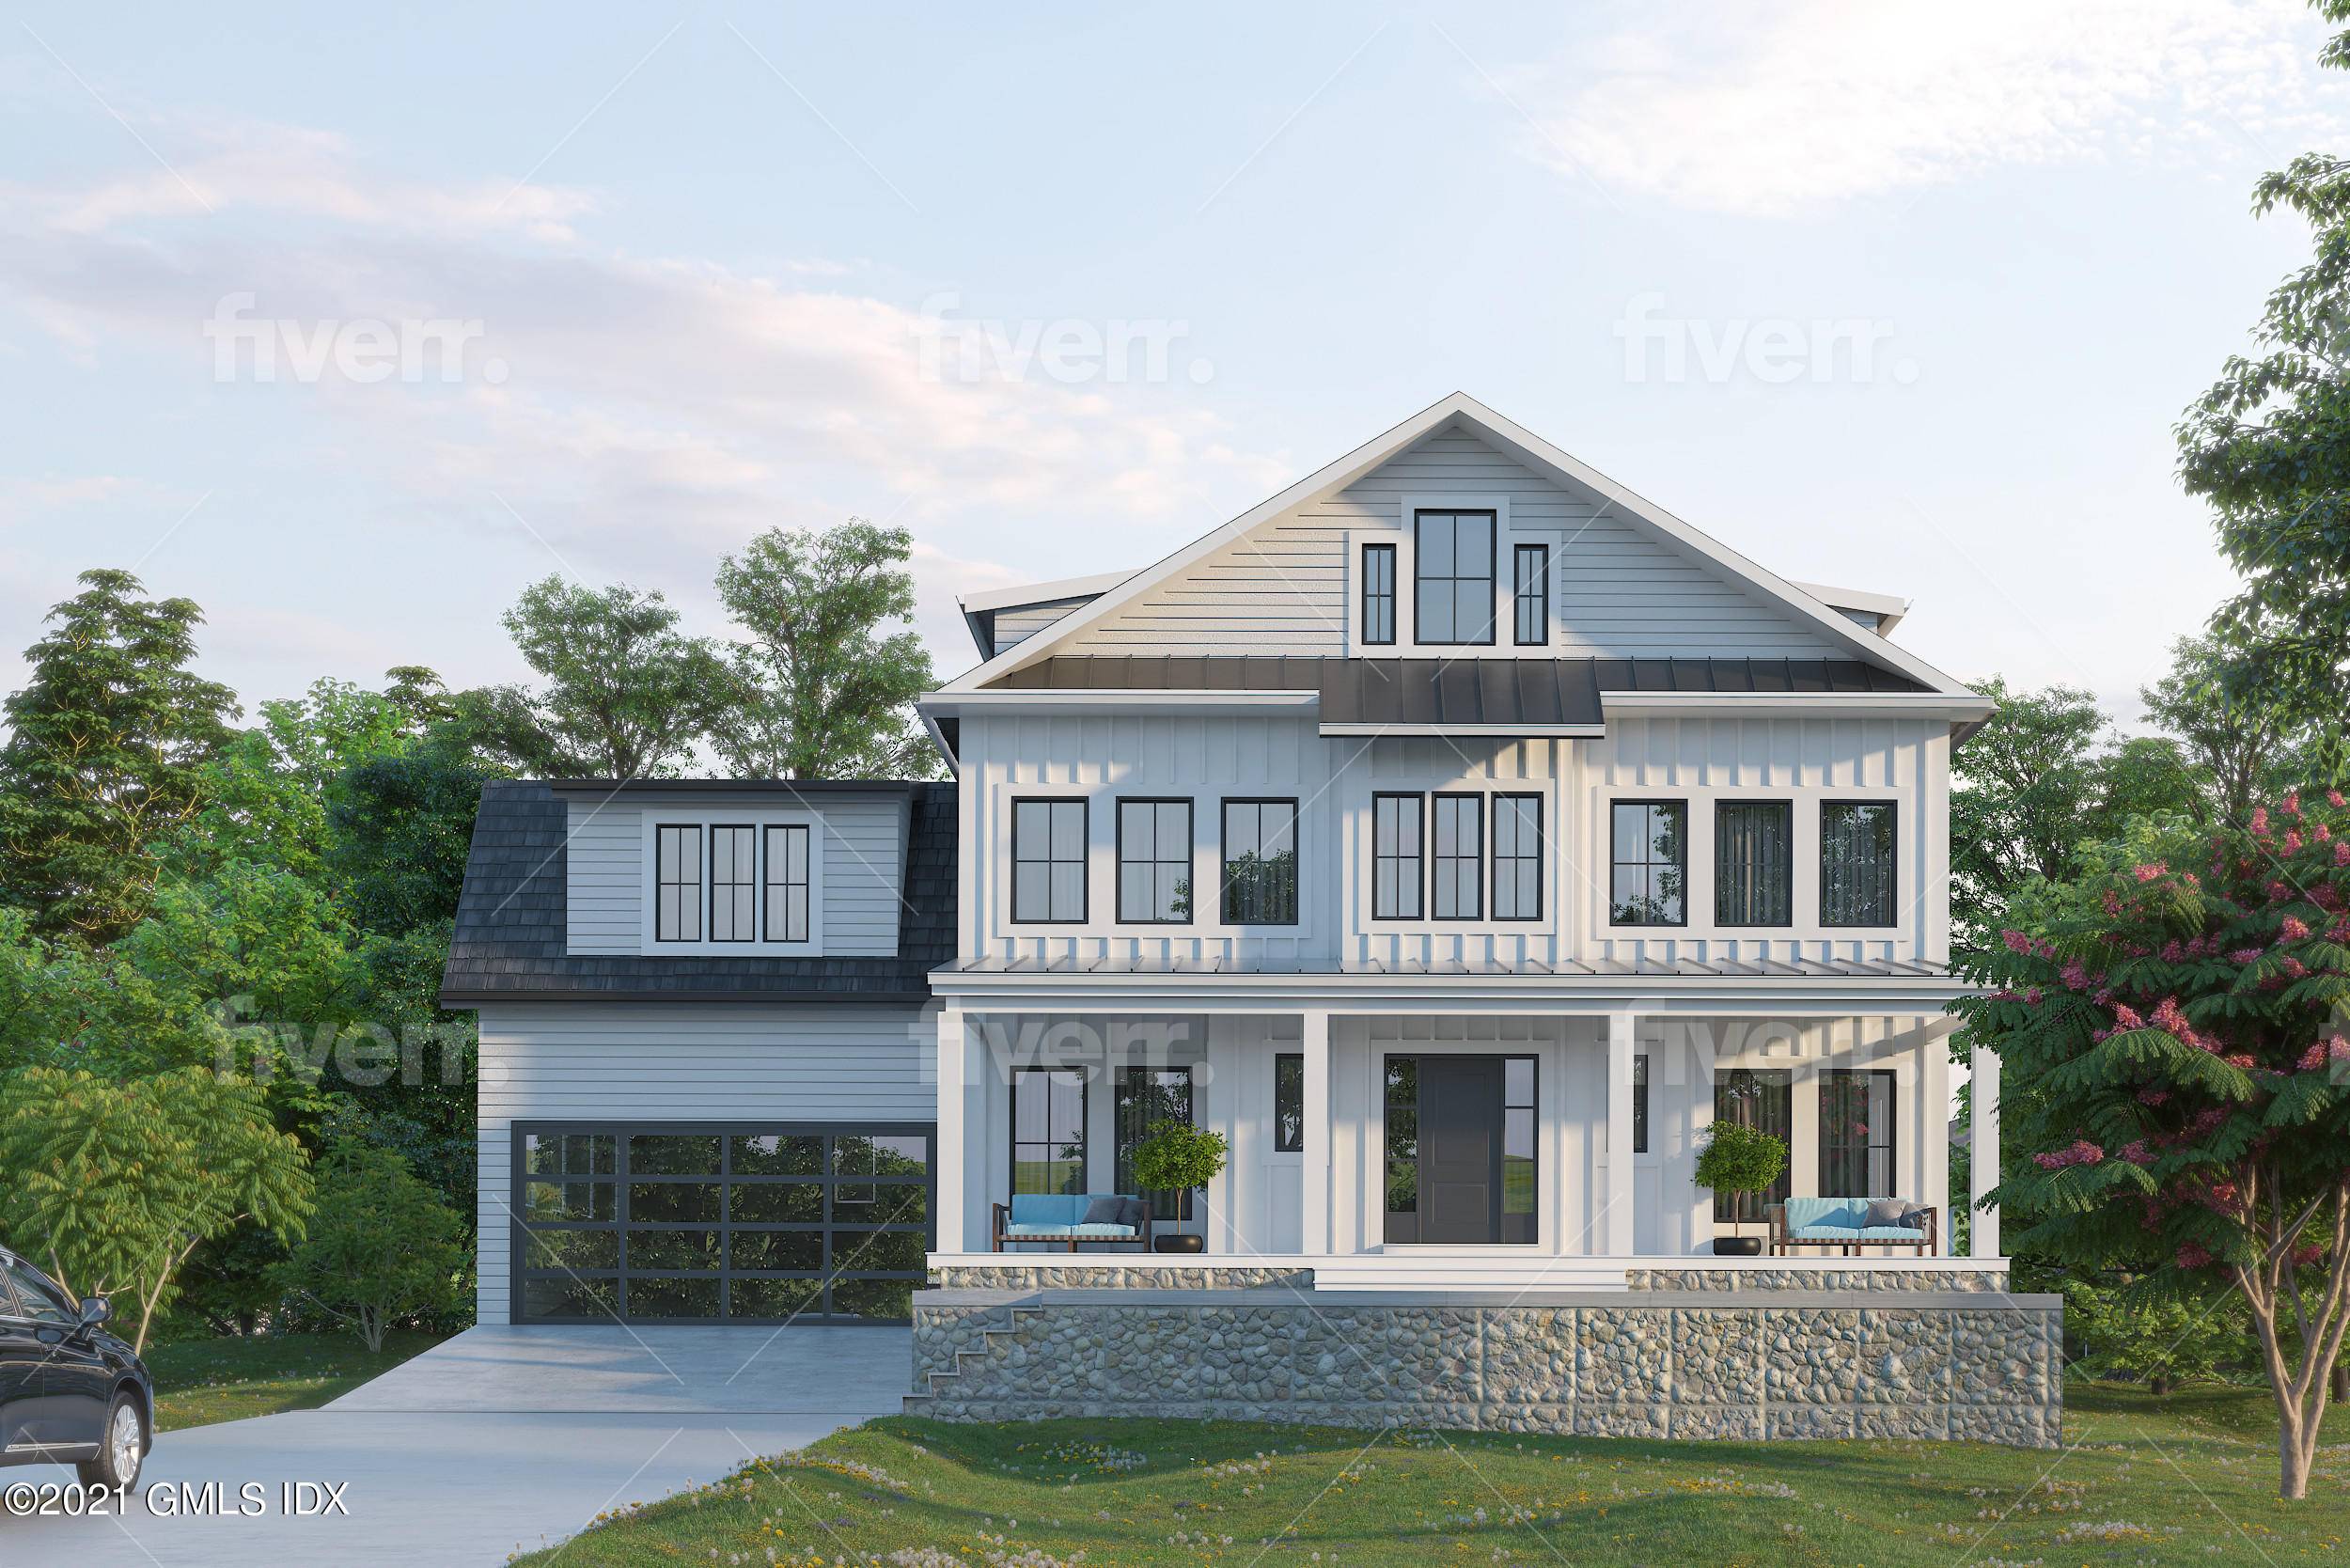 This open floor plan Modern Colonial, 7595 sq ft 5676 sq ft above ground, 5 Bedroom, 4.